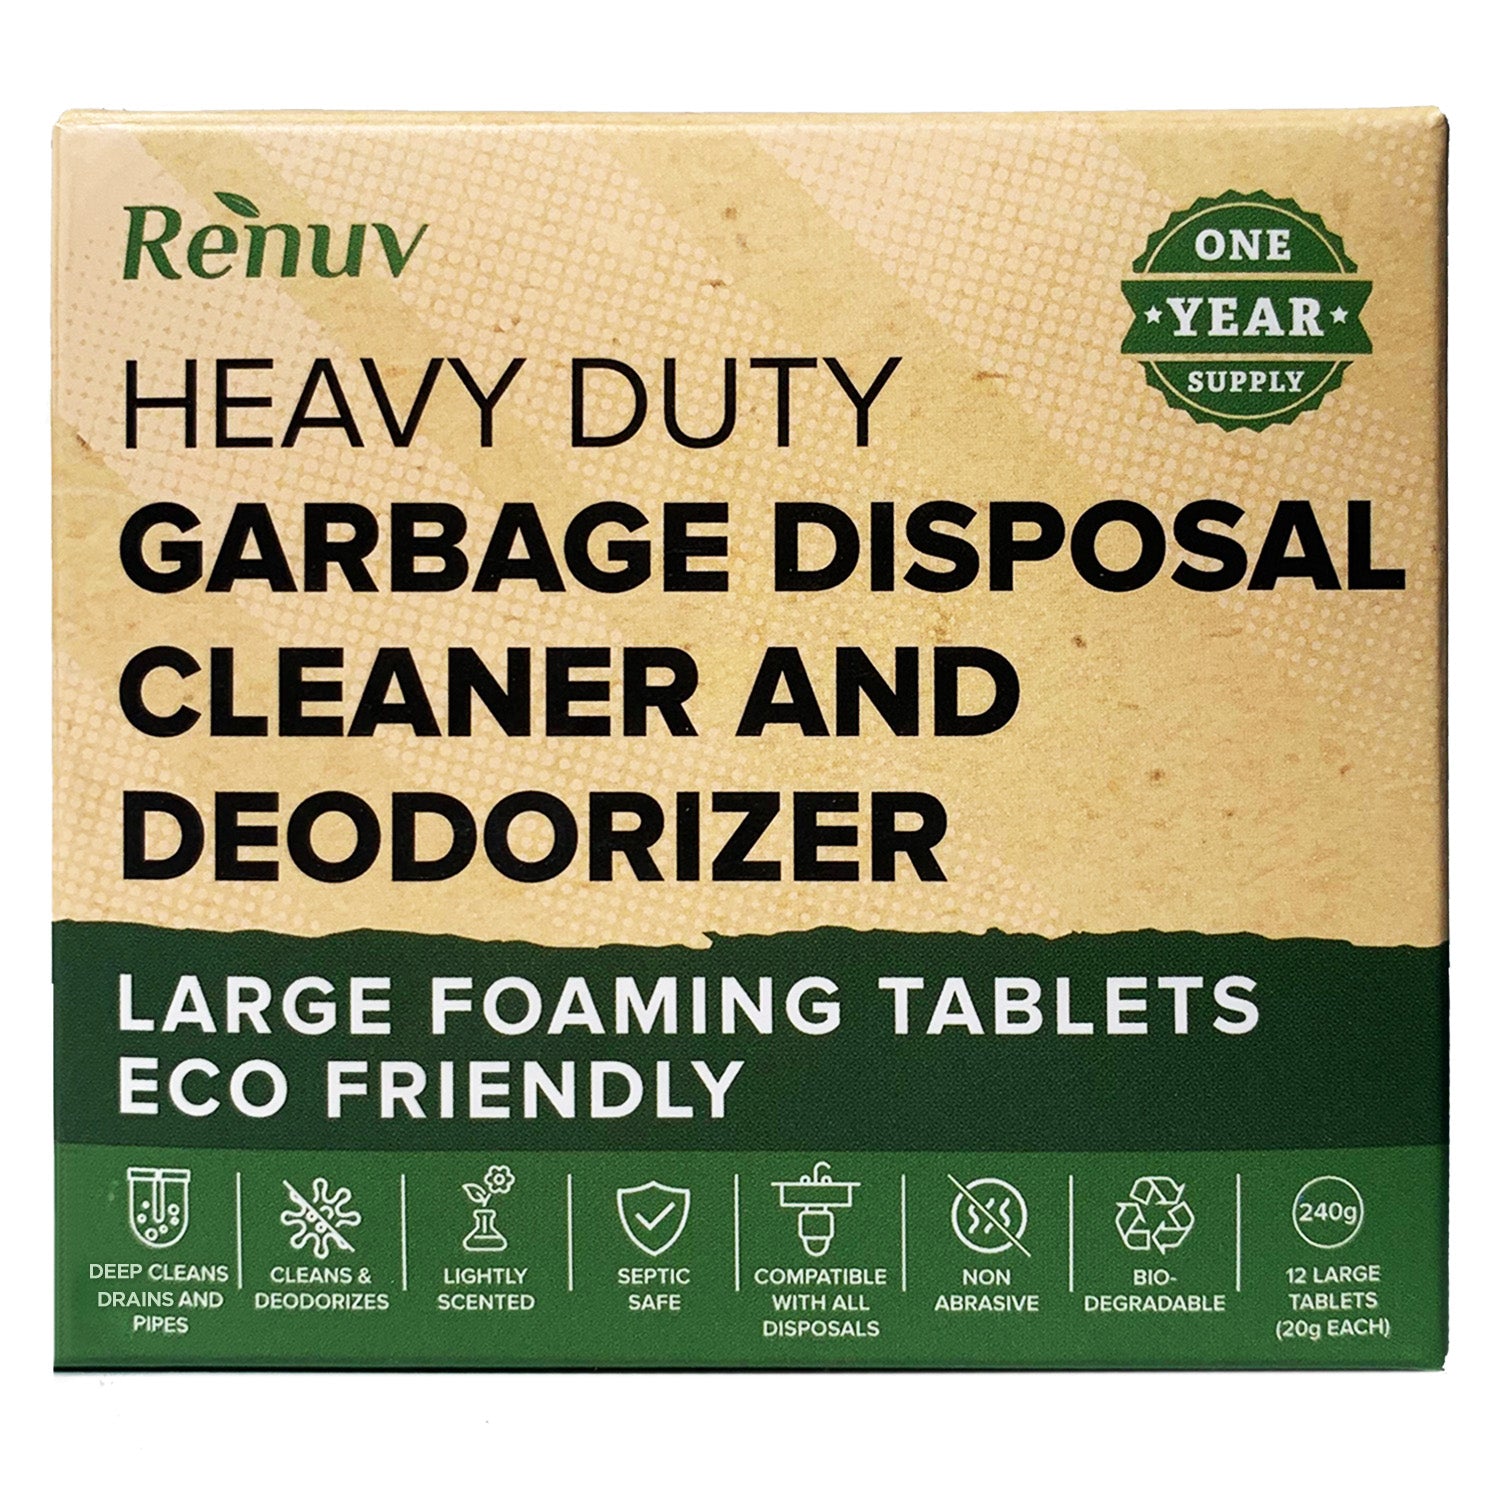 New Product Announcement! Garbage Disposal Cleaner and Deodorizer!